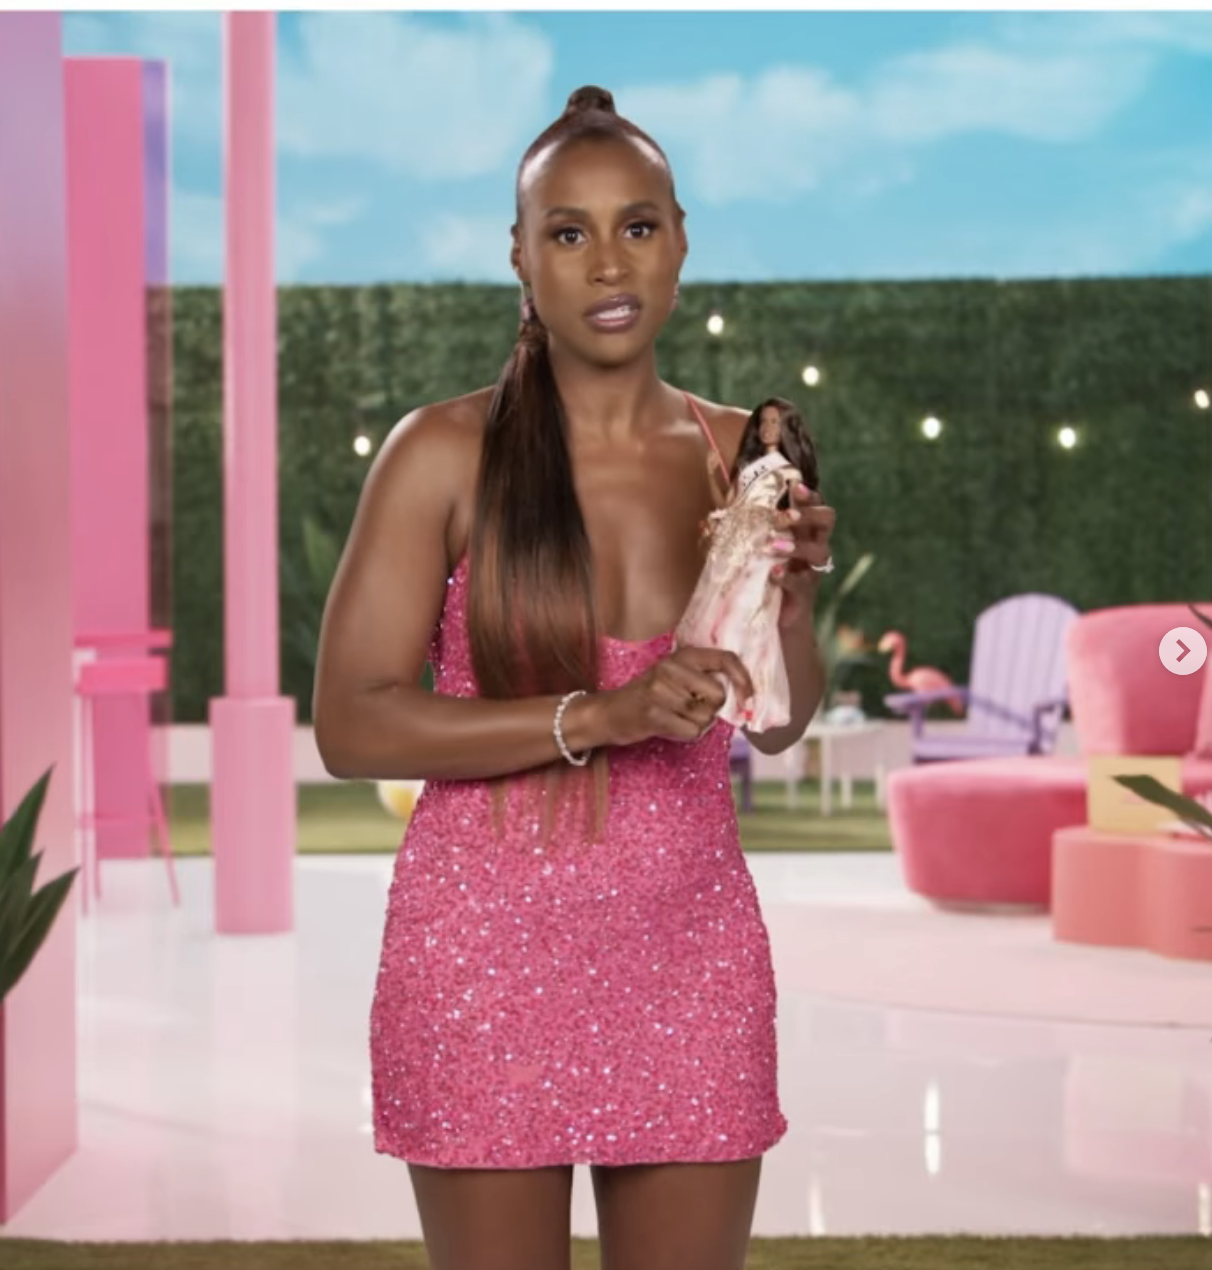 Issa holding a Barbie while wearing the sparkly minidress